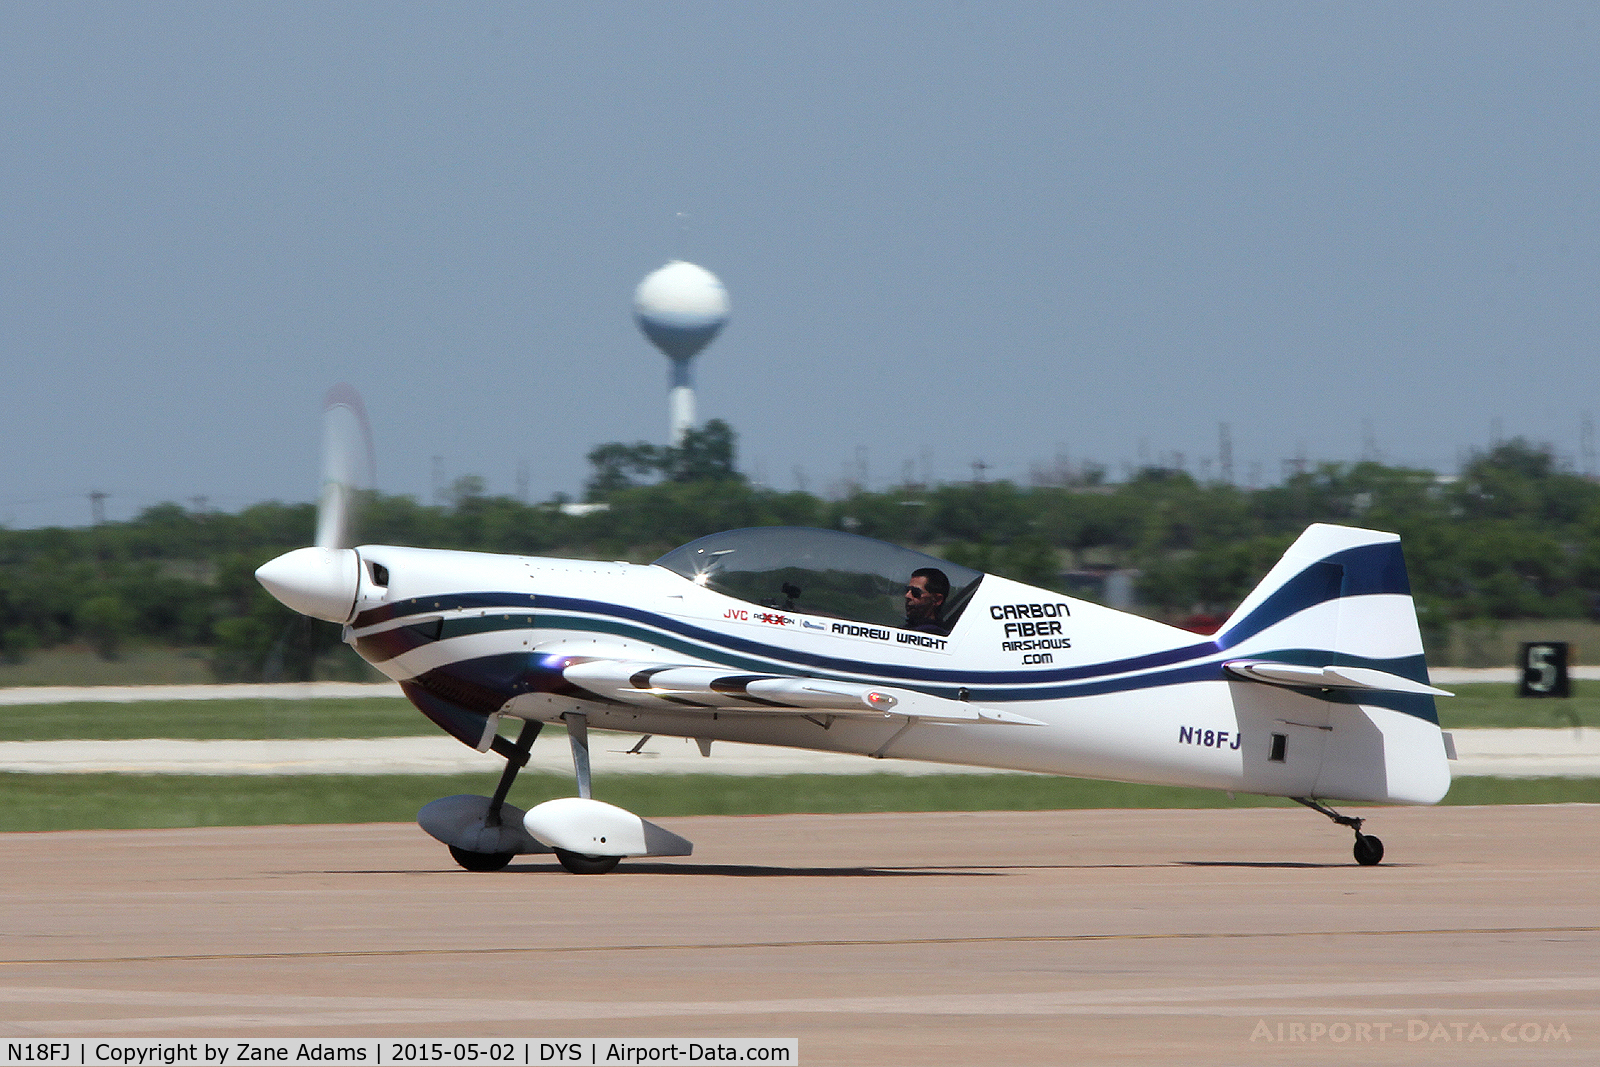 N18FJ, 1998 Giles G-202 C/N 018, At the 2015 Big Country Airshow - Dyess AFB